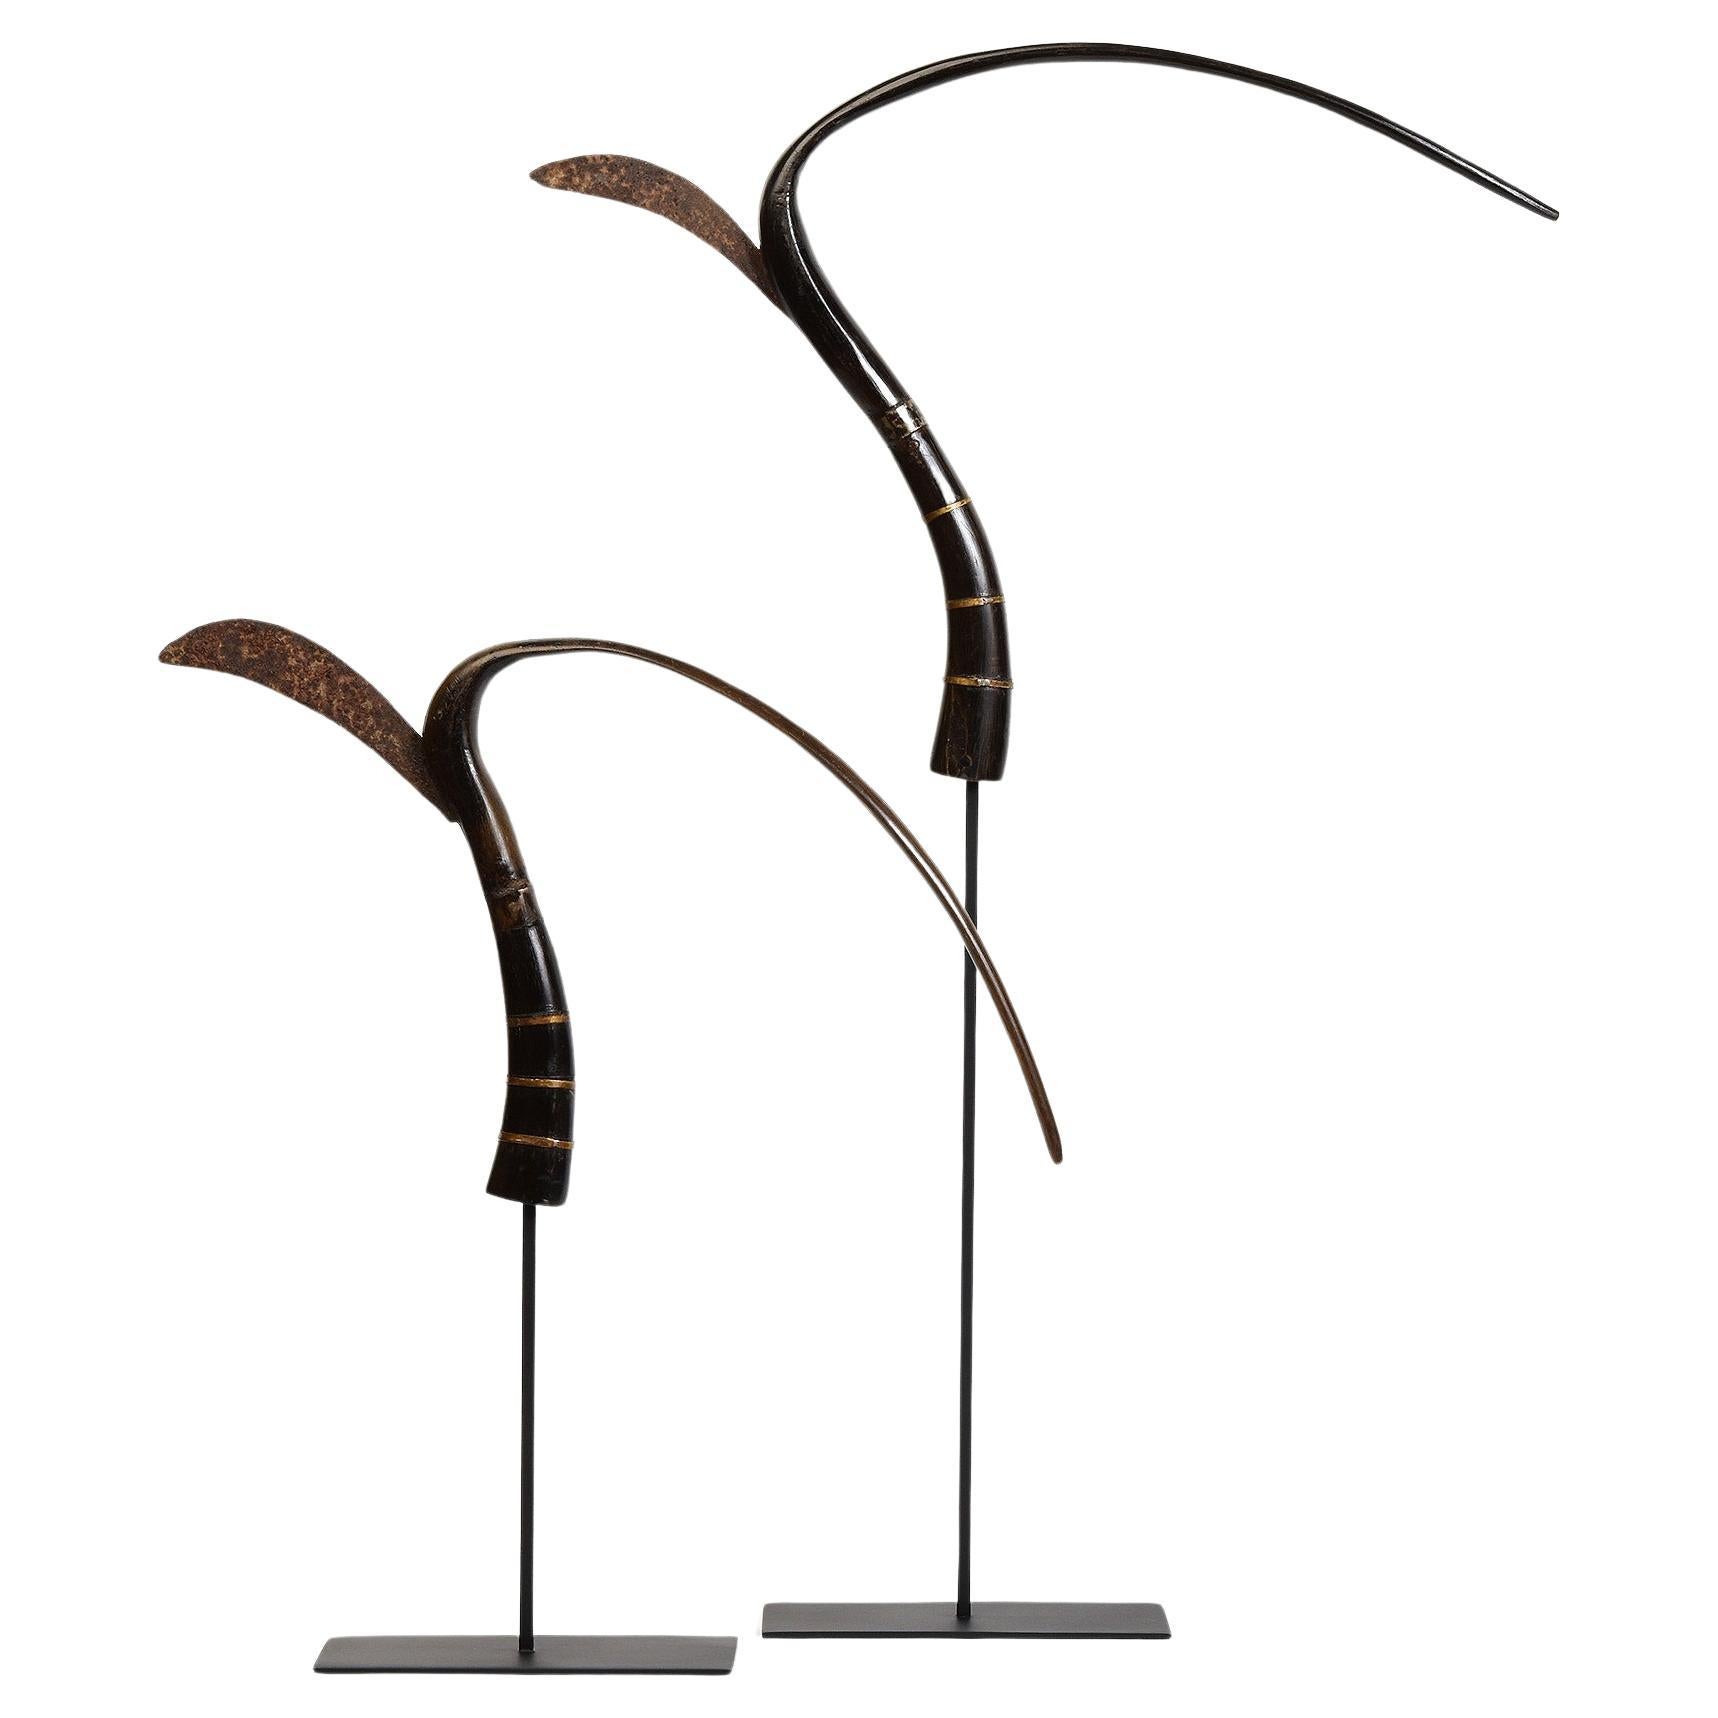 20th Century, A Pair of Cambodia Rice Cutters with Stand